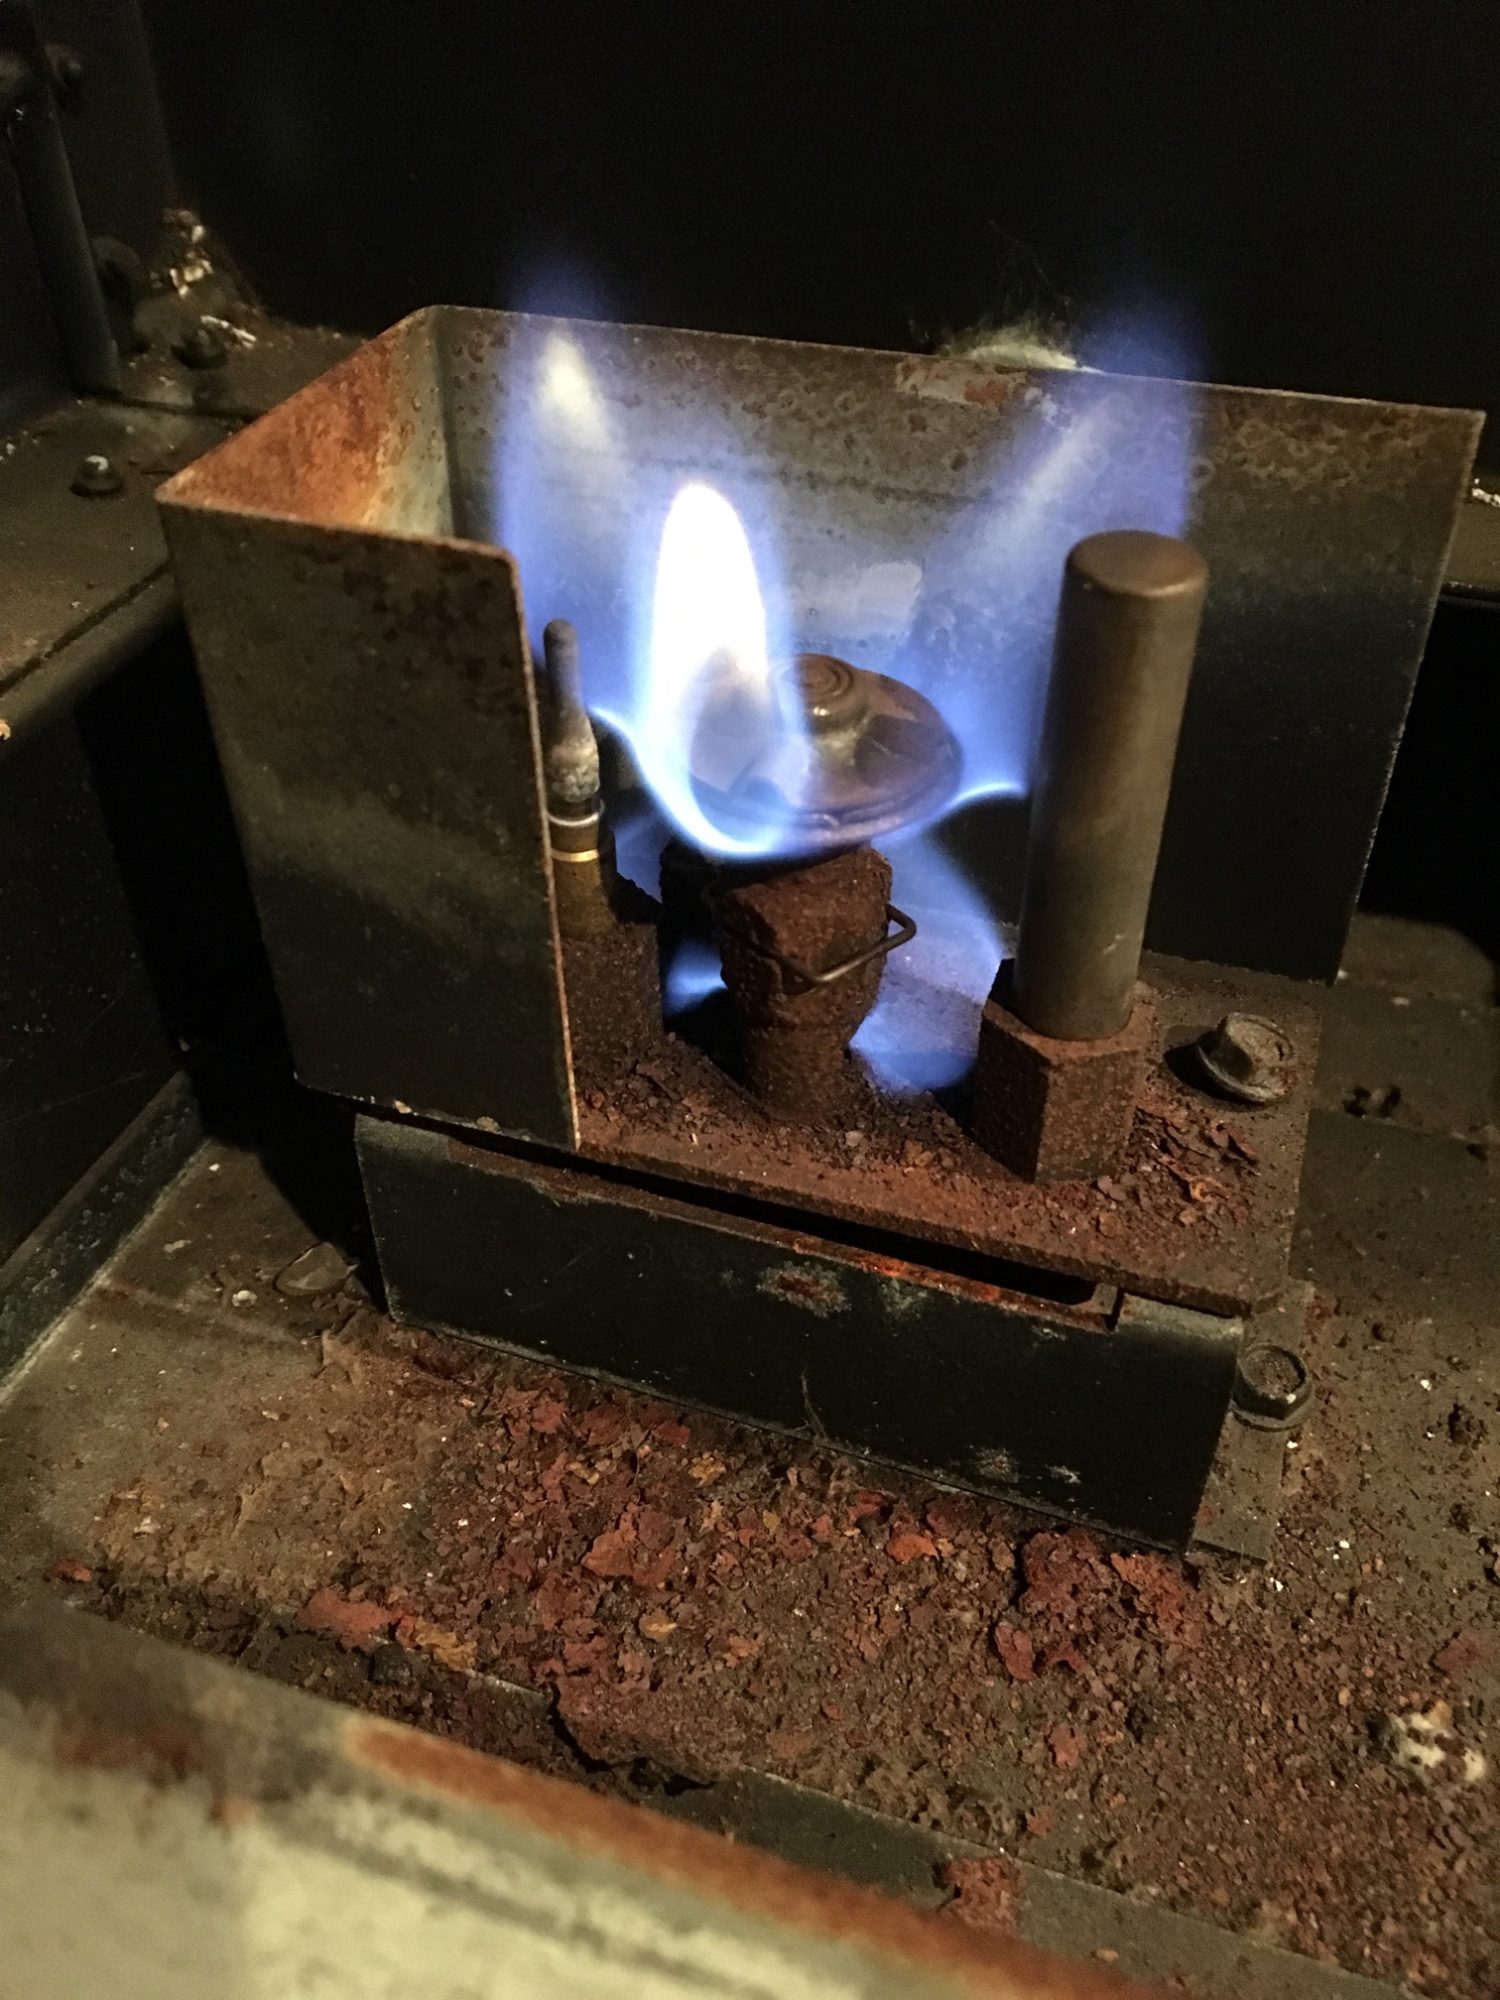 My Pilot Stays Lit But Eventually Goes, Is It Safe To Keep Pilot Light On Gas Fireplace Uk